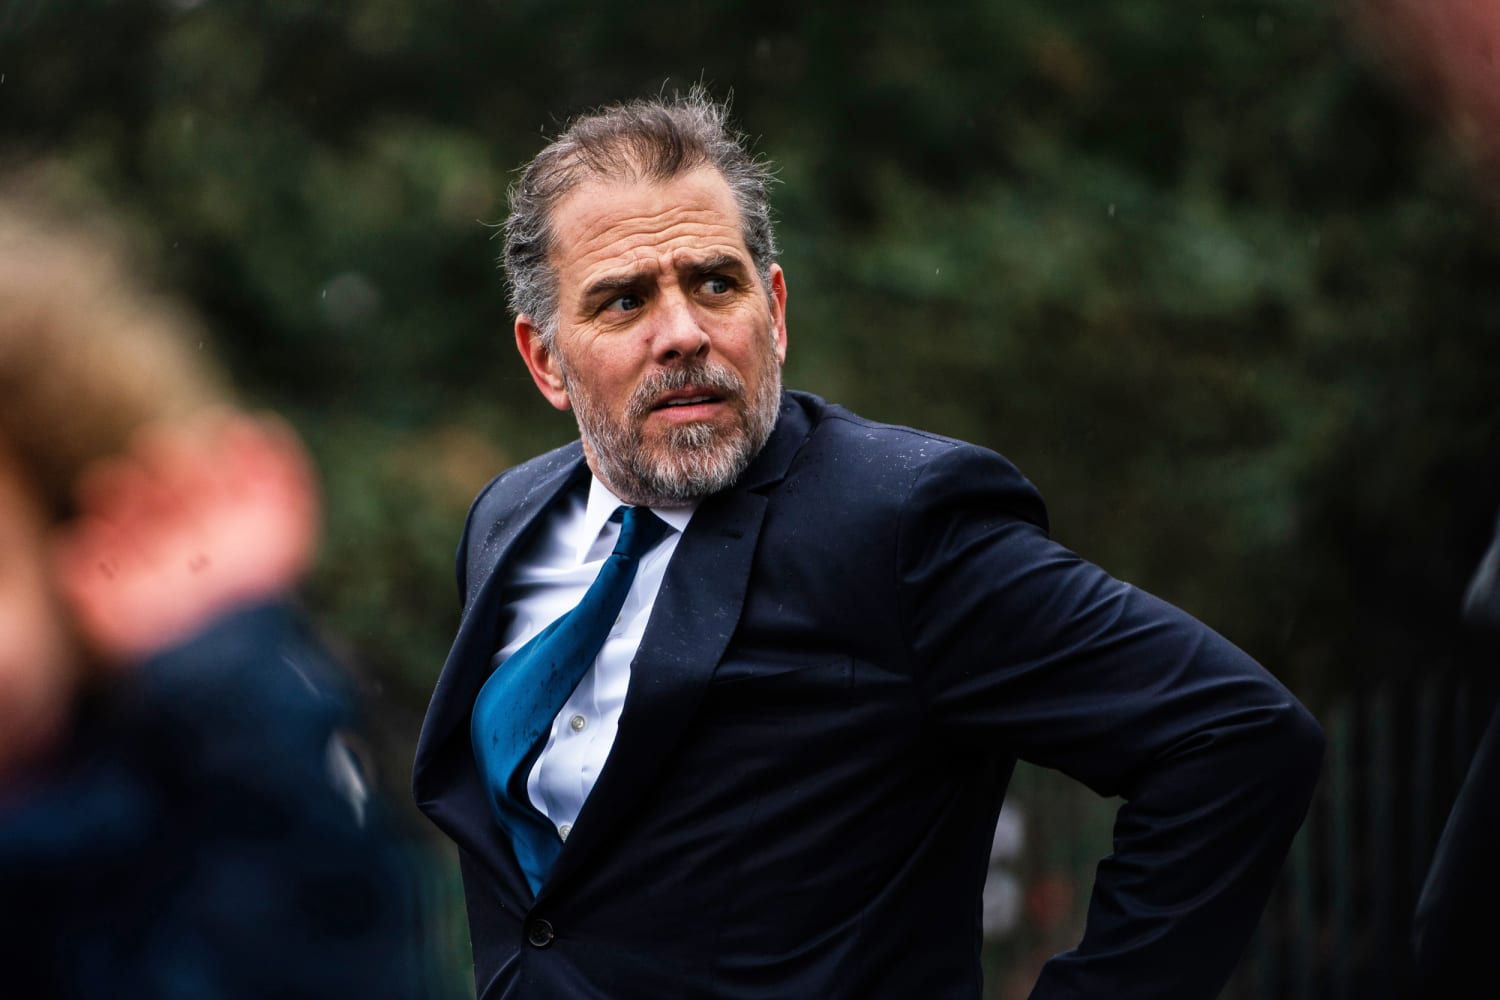 IRS agent tells House committee there was meddling with Hunter Biden case pic